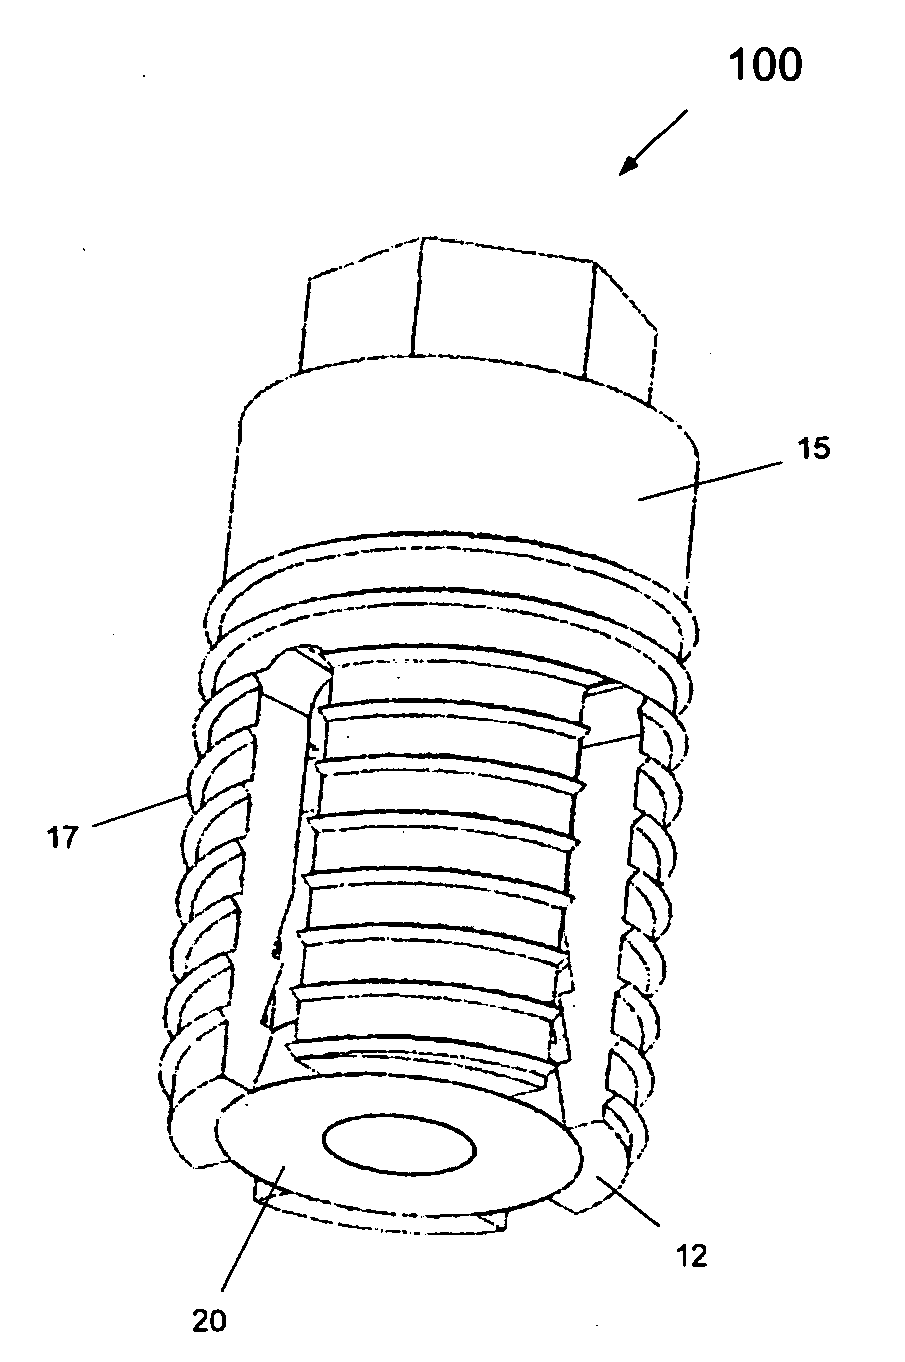 Expandable dental implants of high surface area and methods of expanding the same